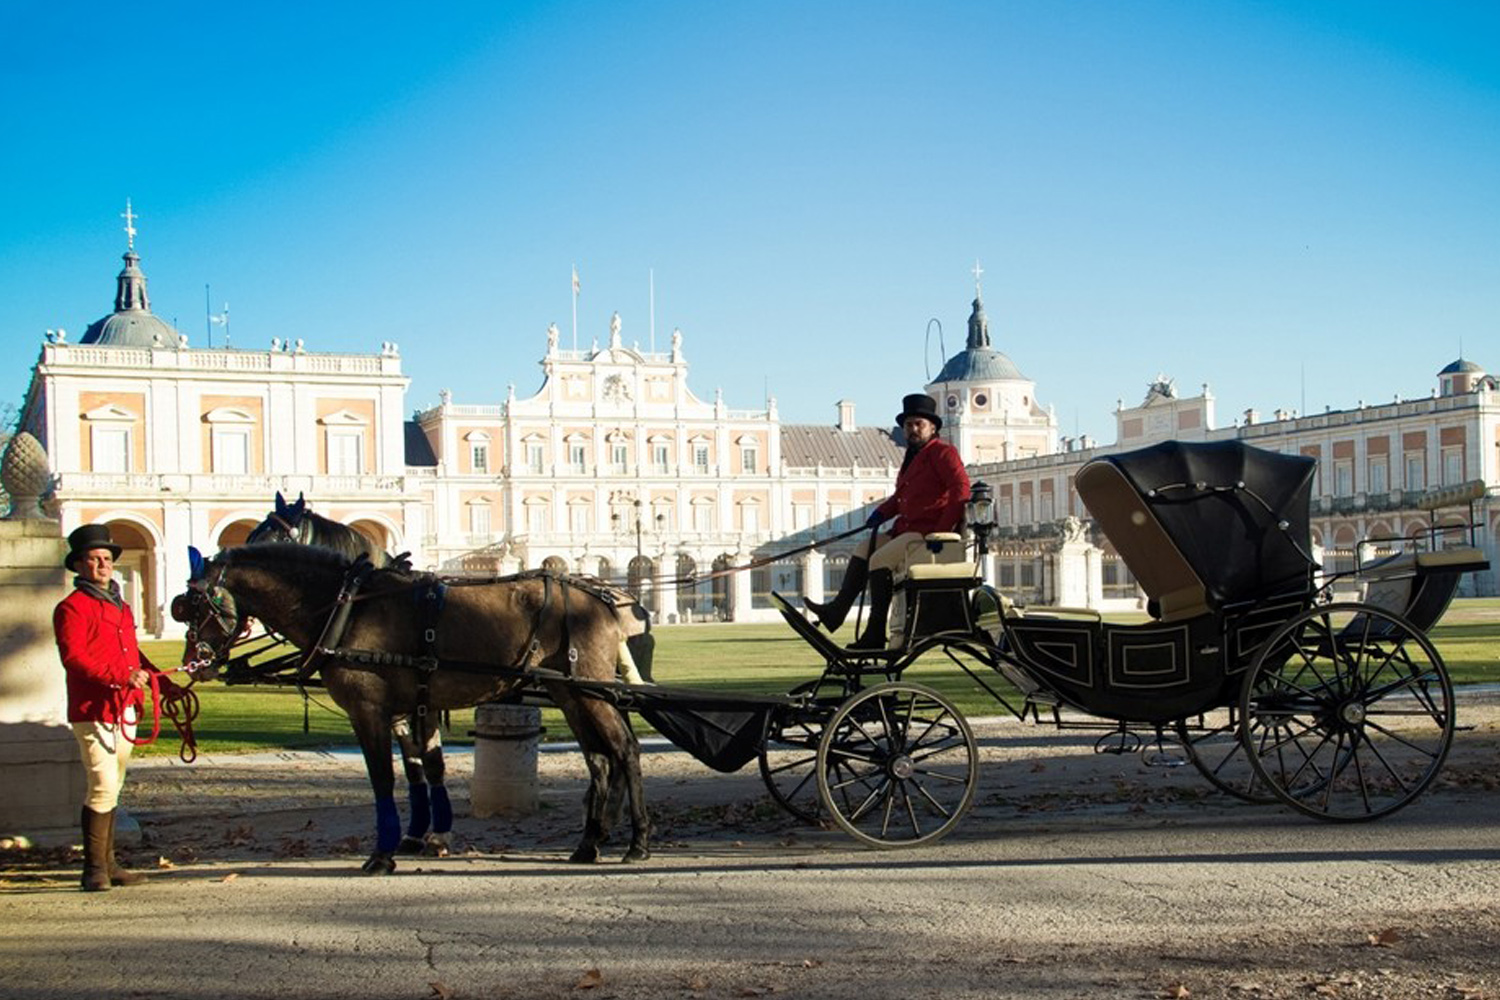 A ride in a calash by the Royal Palace of Aranjuez